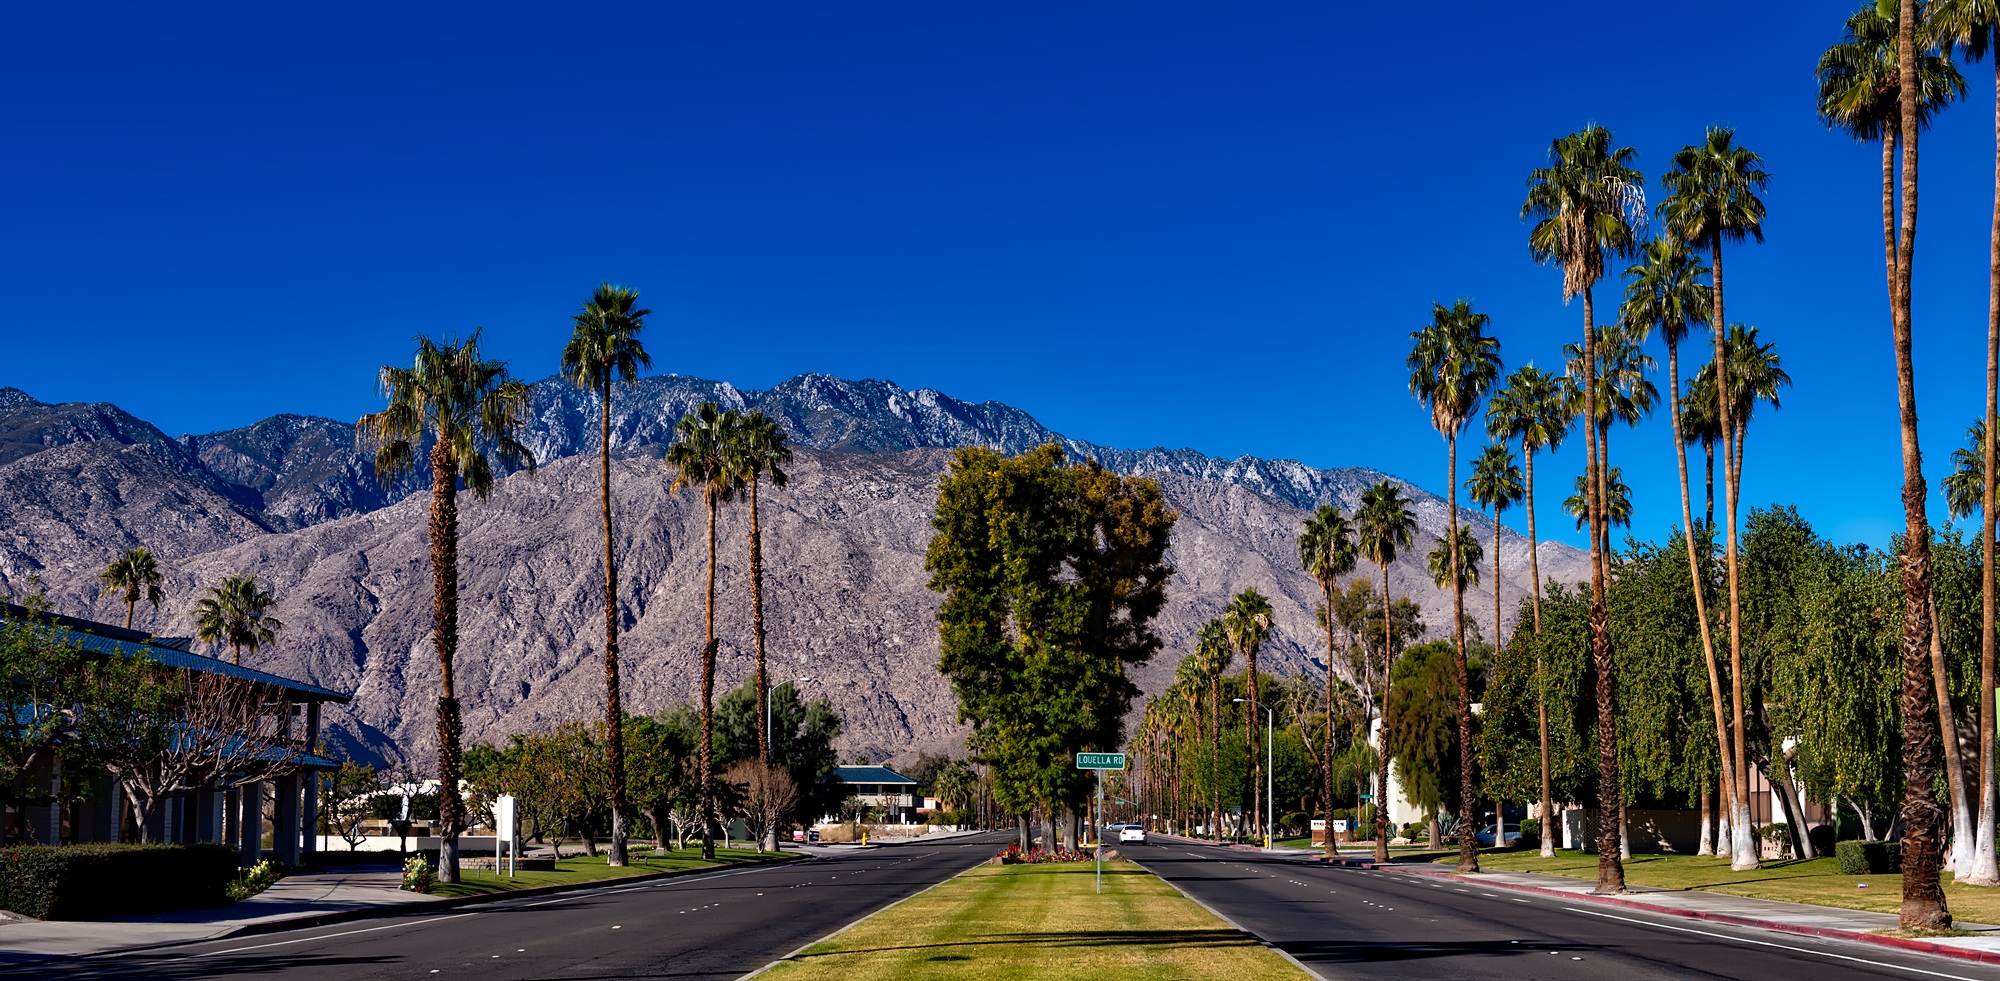 Explore Palm Springs: the top things to do, where to stay and what